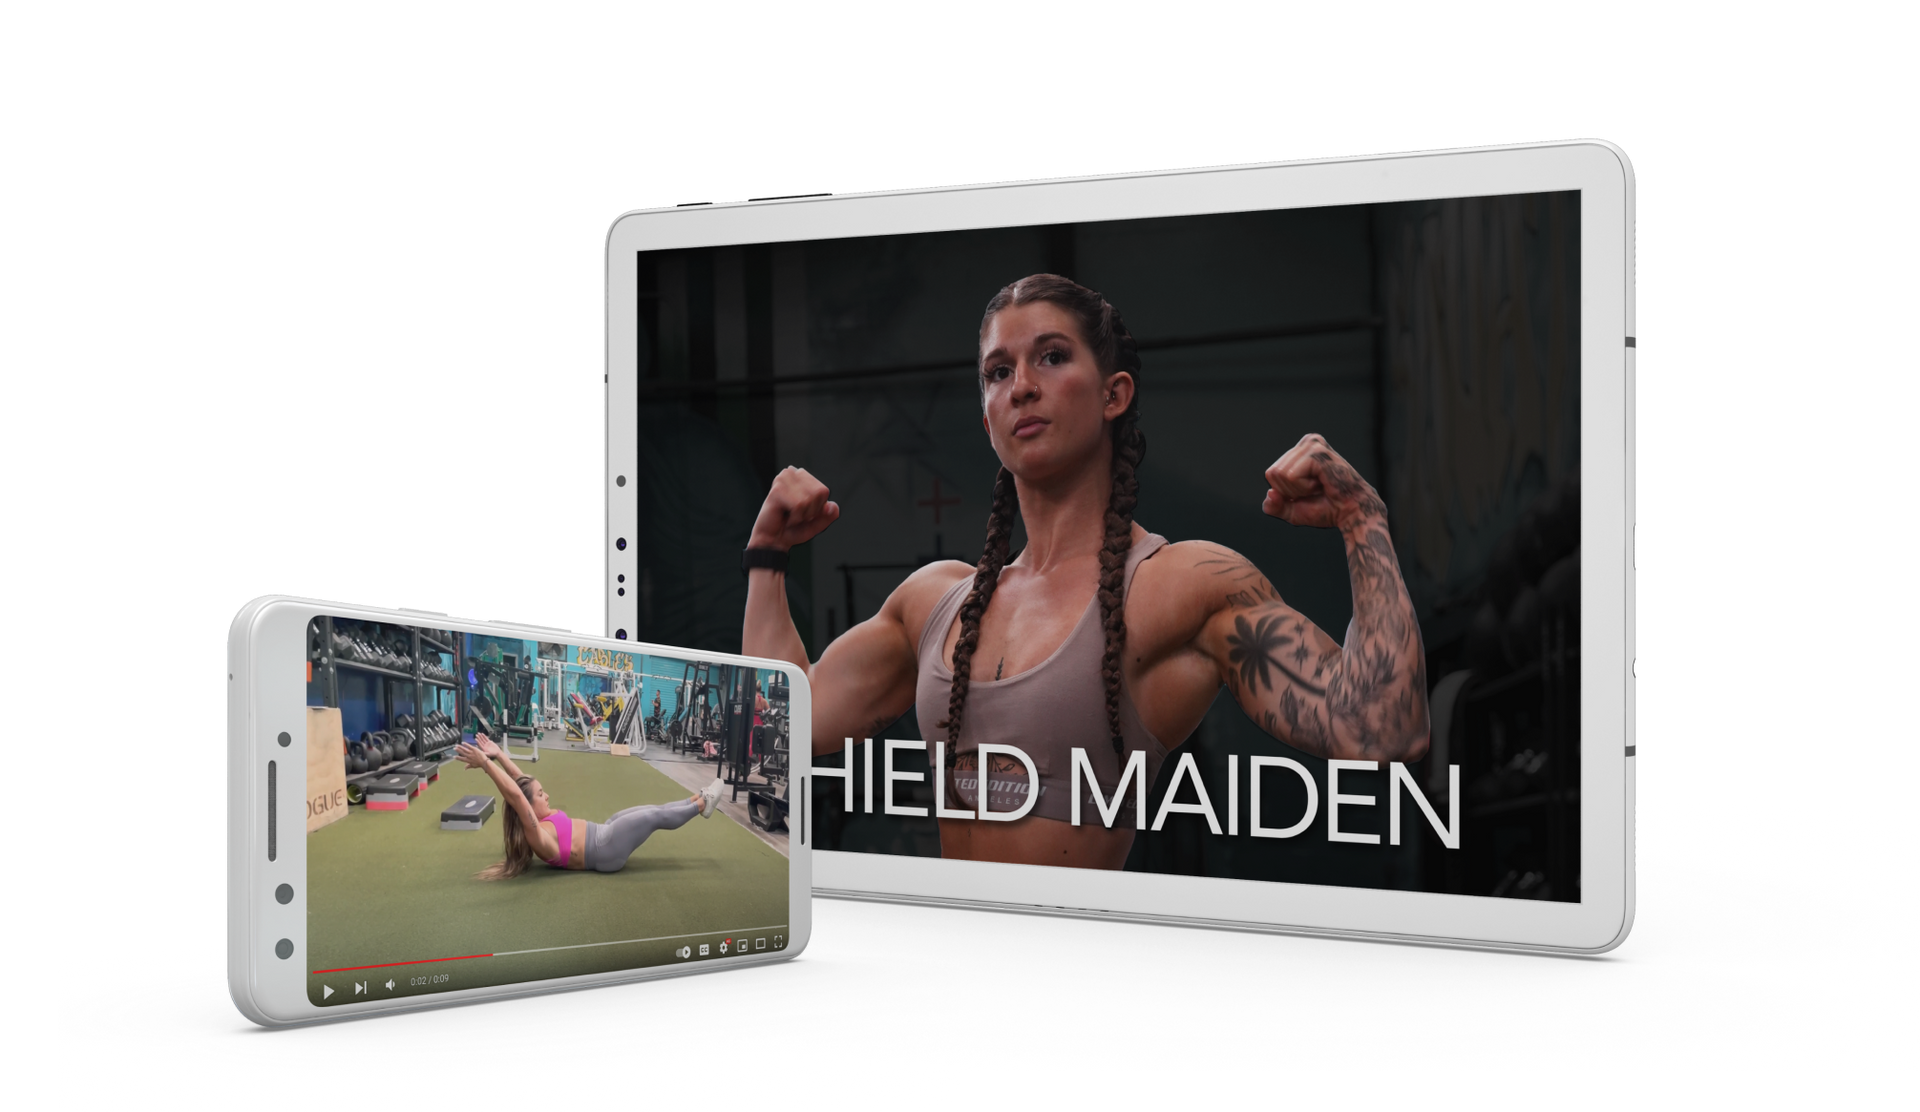 Shield-maiden Life Healthy, Fit, and Fearless Video Blog.